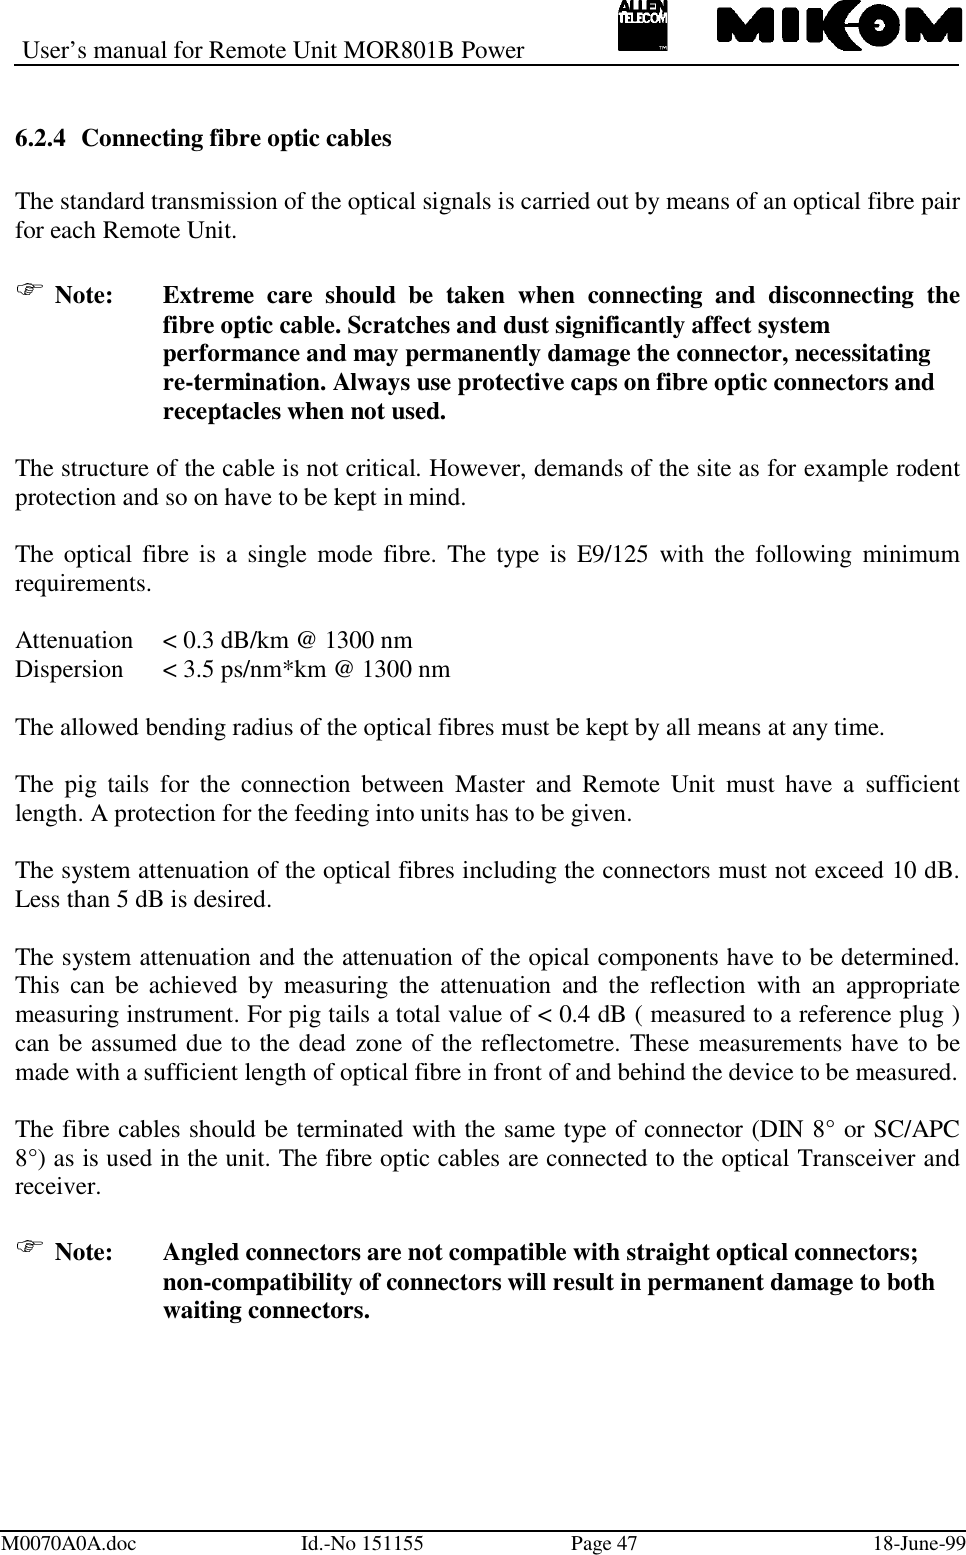 User’s manual for Remote Unit MOR801B PowerM0070A0A.doc Id.-No 151155 Page 47 18-June-996.2.4 Connecting fibre optic cablesThe standard transmission of the optical signals is carried out by means of an optical fibre pairfor each Remote Unit. Note: Extreme care should be taken when connecting and disconnecting thefibre optic cable. Scratches and dust significantly affect system performance and may permanently damage the connector, necessitating re-termination. Always use protective caps on fibre optic connectors and receptacles when not used.The structure of the cable is not critical. However, demands of the site as for example rodentprotection and so on have to be kept in mind.The optical fibre is a single mode fibre. The type is E9/125 with the following minimumrequirements.Attenuation &lt; 0.3 dB/km @ 1300 nmDispersion &lt; 3.5 ps/nm*km @ 1300 nmThe allowed bending radius of the optical fibres must be kept by all means at any time.The pig tails for the connection between Master and Remote Unit must have a sufficientlength. A protection for the feeding into units has to be given.The system attenuation of the optical fibres including the connectors must not exceed 10 dB.Less than 5 dB is desired.The system attenuation and the attenuation of the opical components have to be determined.This can be achieved by measuring the attenuation and the reflection with an appropriatemeasuring instrument. For pig tails a total value of &lt; 0.4 dB ( measured to a reference plug )can be assumed due to the dead zone of the reflectometre. These measurements have to bemade with a sufficient length of optical fibre in front of and behind the device to be measured.The fibre cables should be terminated with the same type of connector (DIN 8° or SC/APC8°) as is used in the unit. The fibre optic cables are connected to the optical Transceiver andreceiver. Note:   Angled connectors are not compatible with straight optical connectors;non-compatibility of connectors will result in permanent damage to bothwaiting connectors.